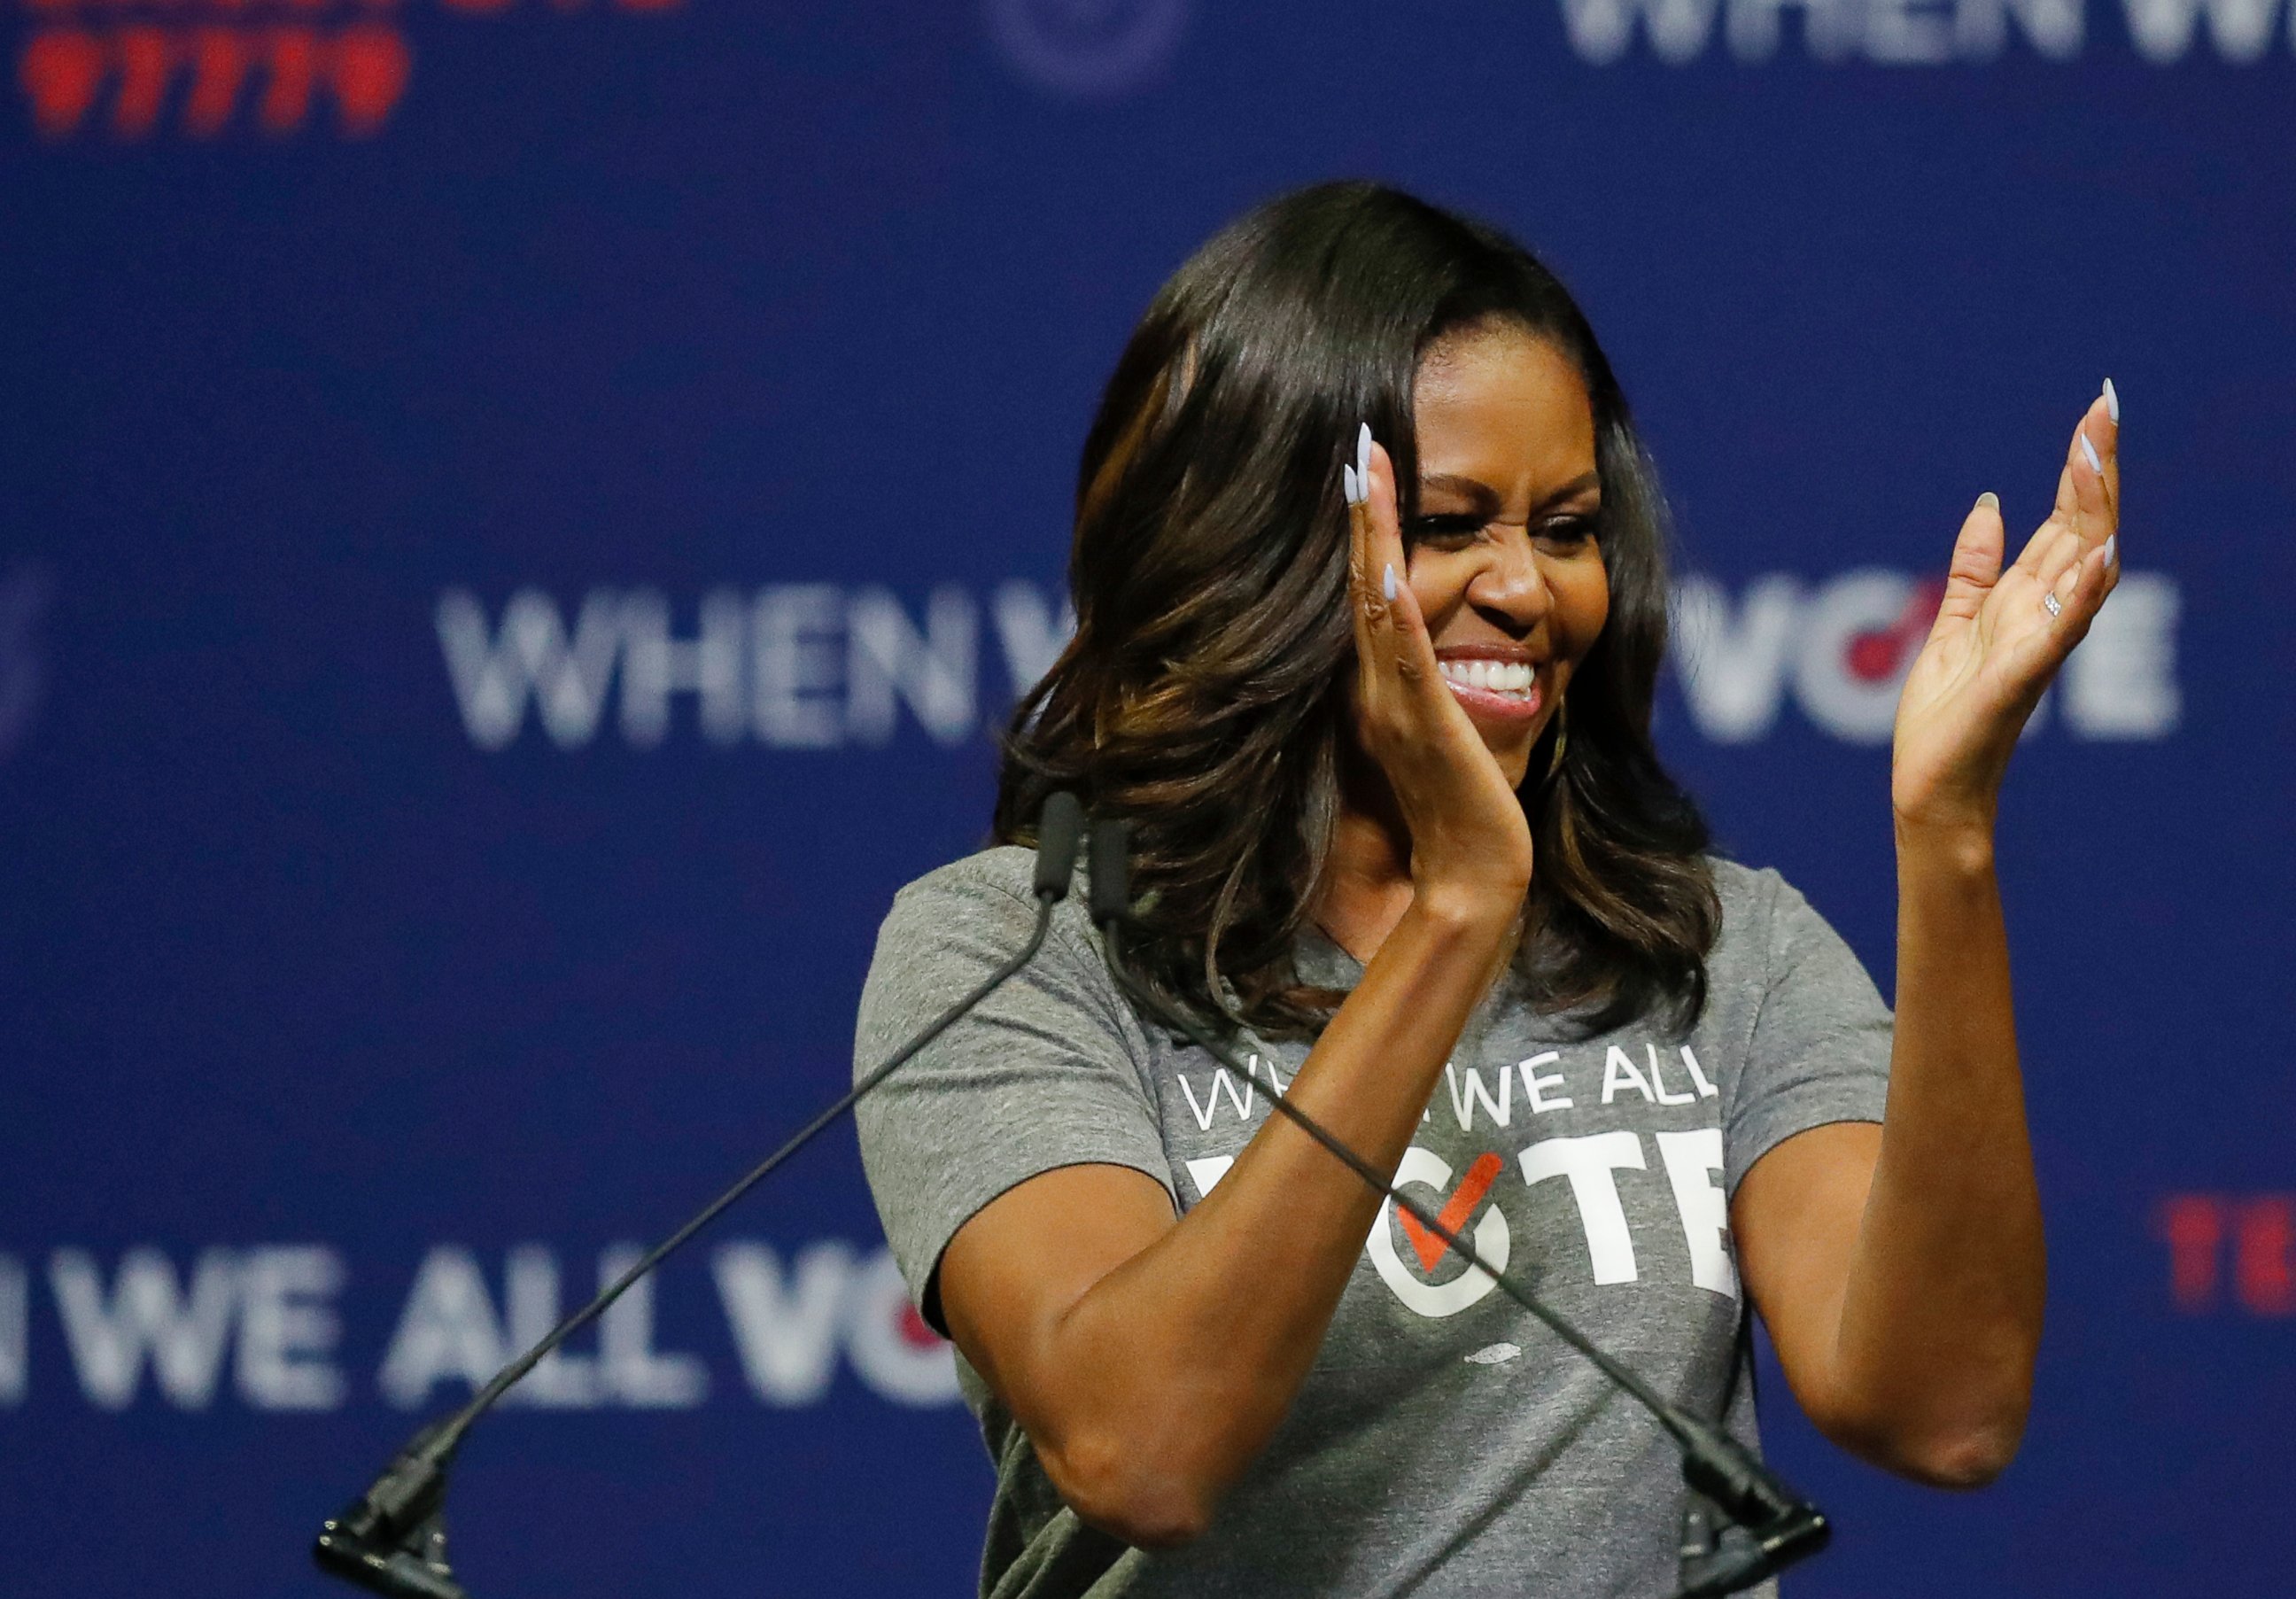 PHOTO: Former first lady Michelle Obama claps as she speaks at a rally to encourage voter registration on Friday, Sept. 28, 2018, in Coral Gables, Fla.